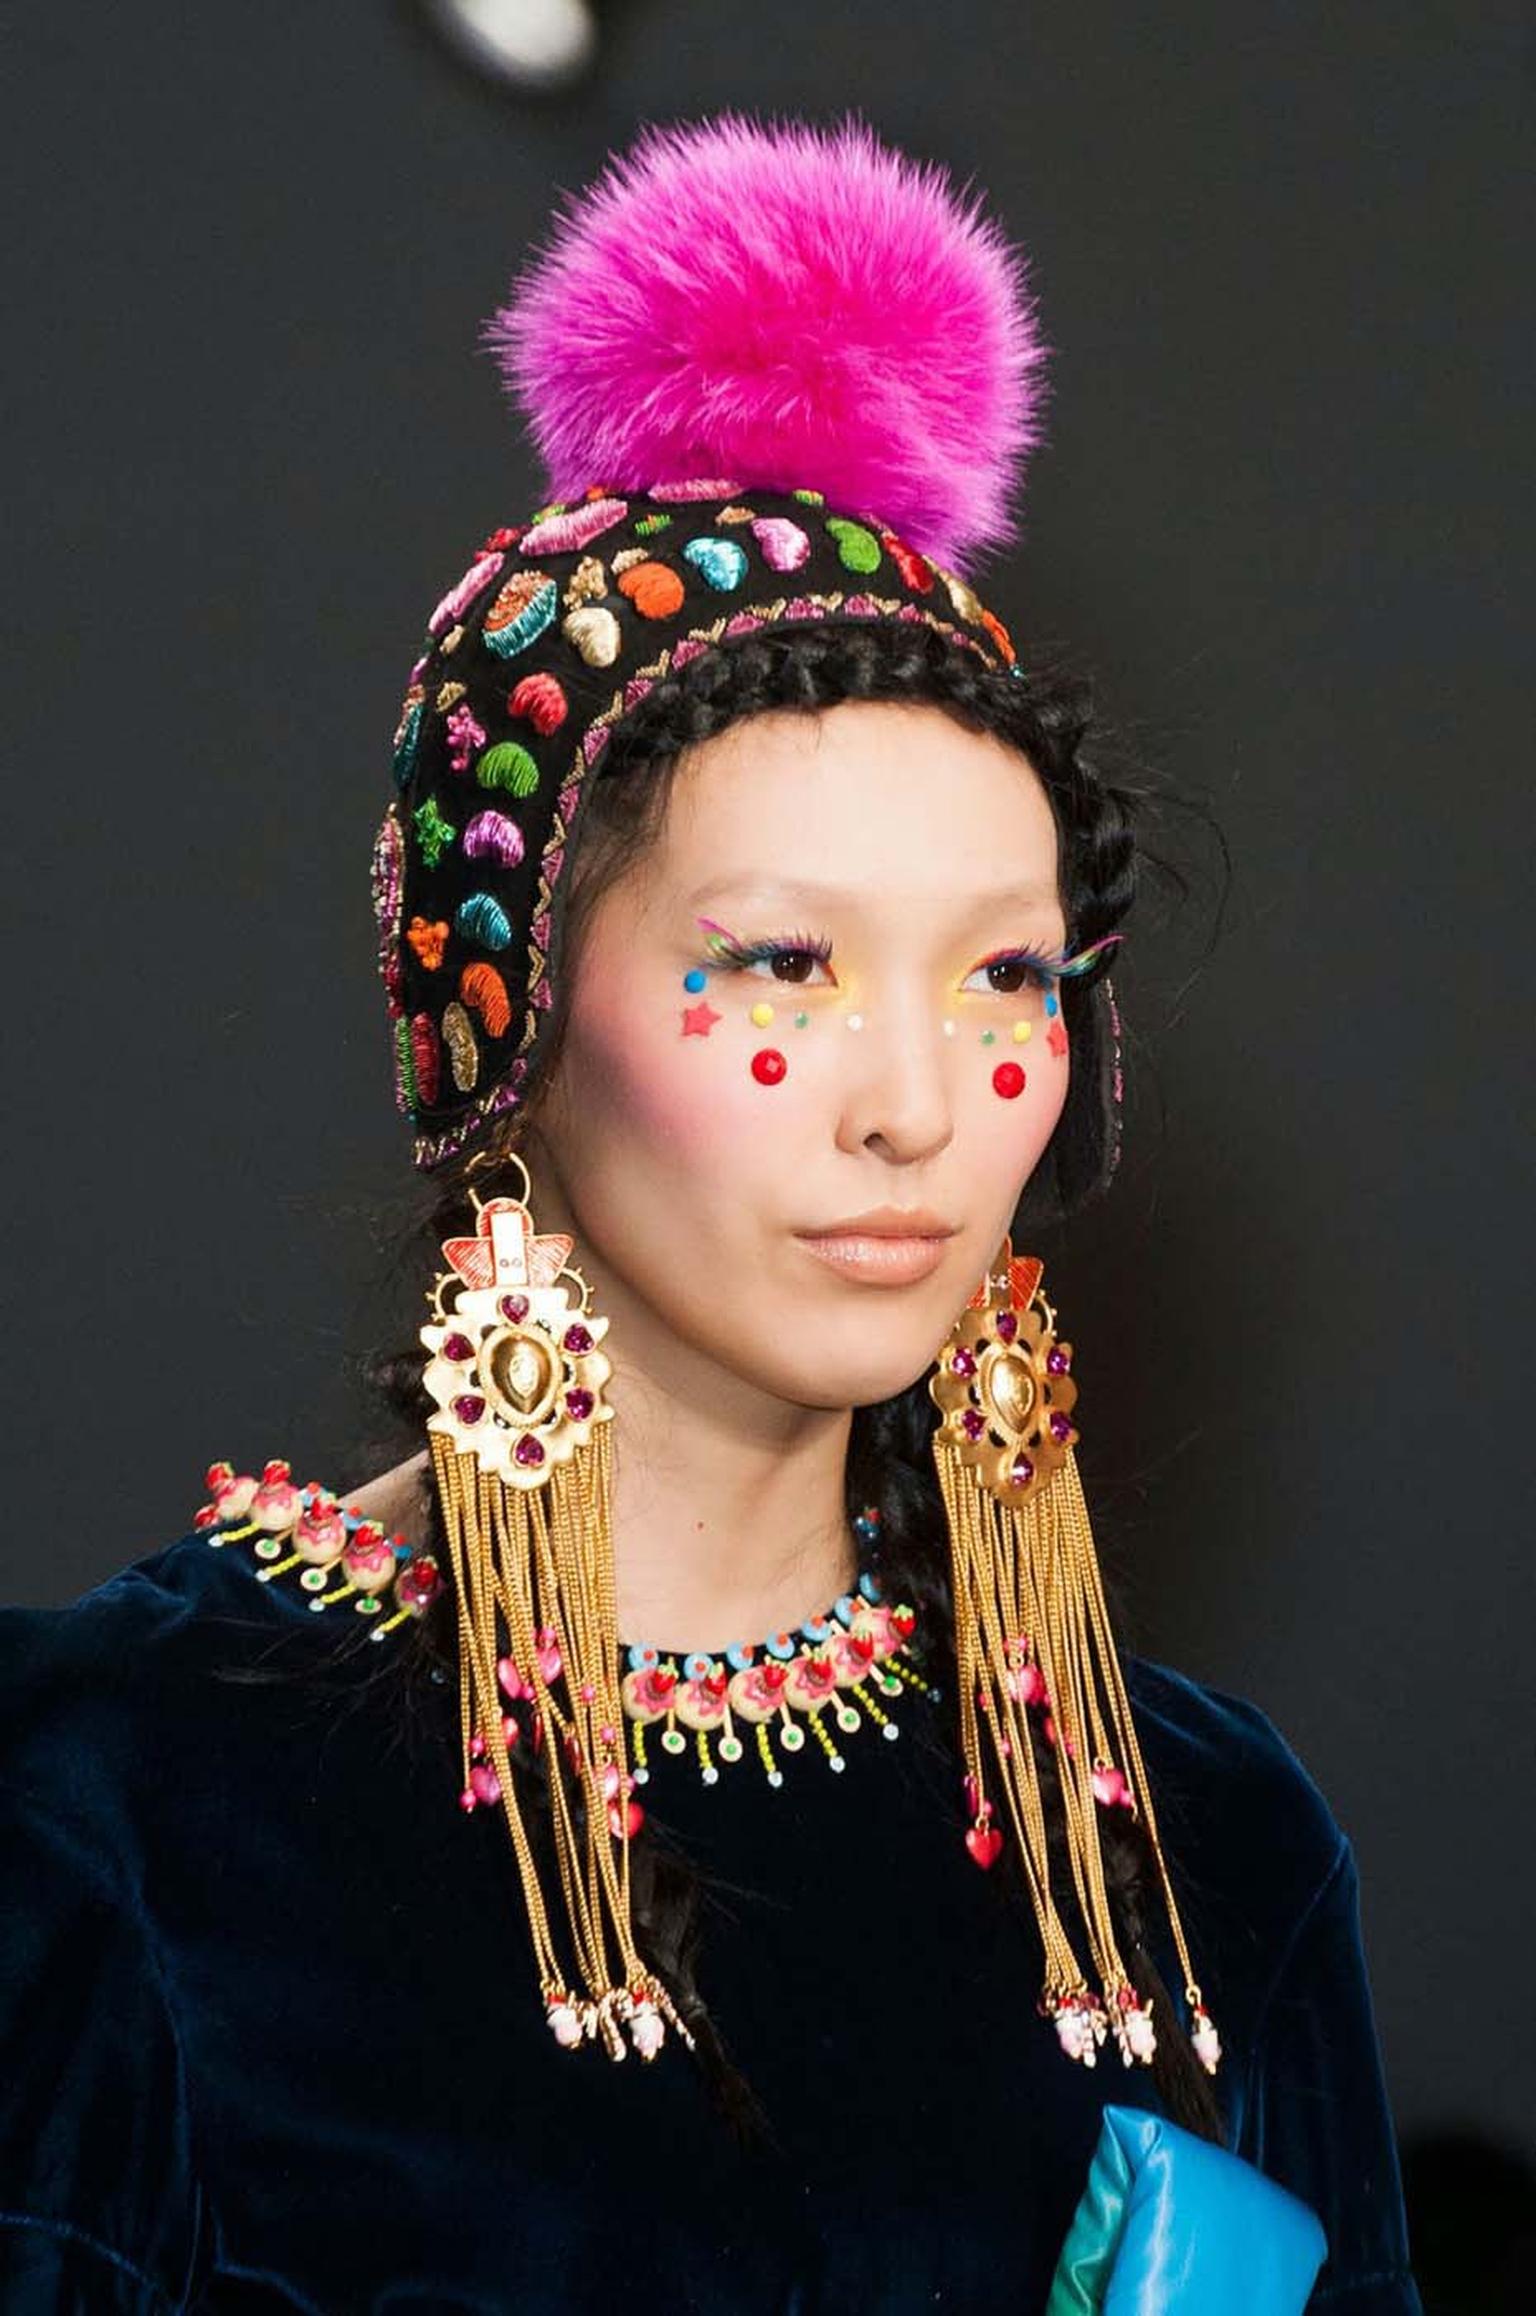 A model showcasing earrings from the Amrapali and Manish Arora AW 2014-15 collection during Paris Fashion Week.